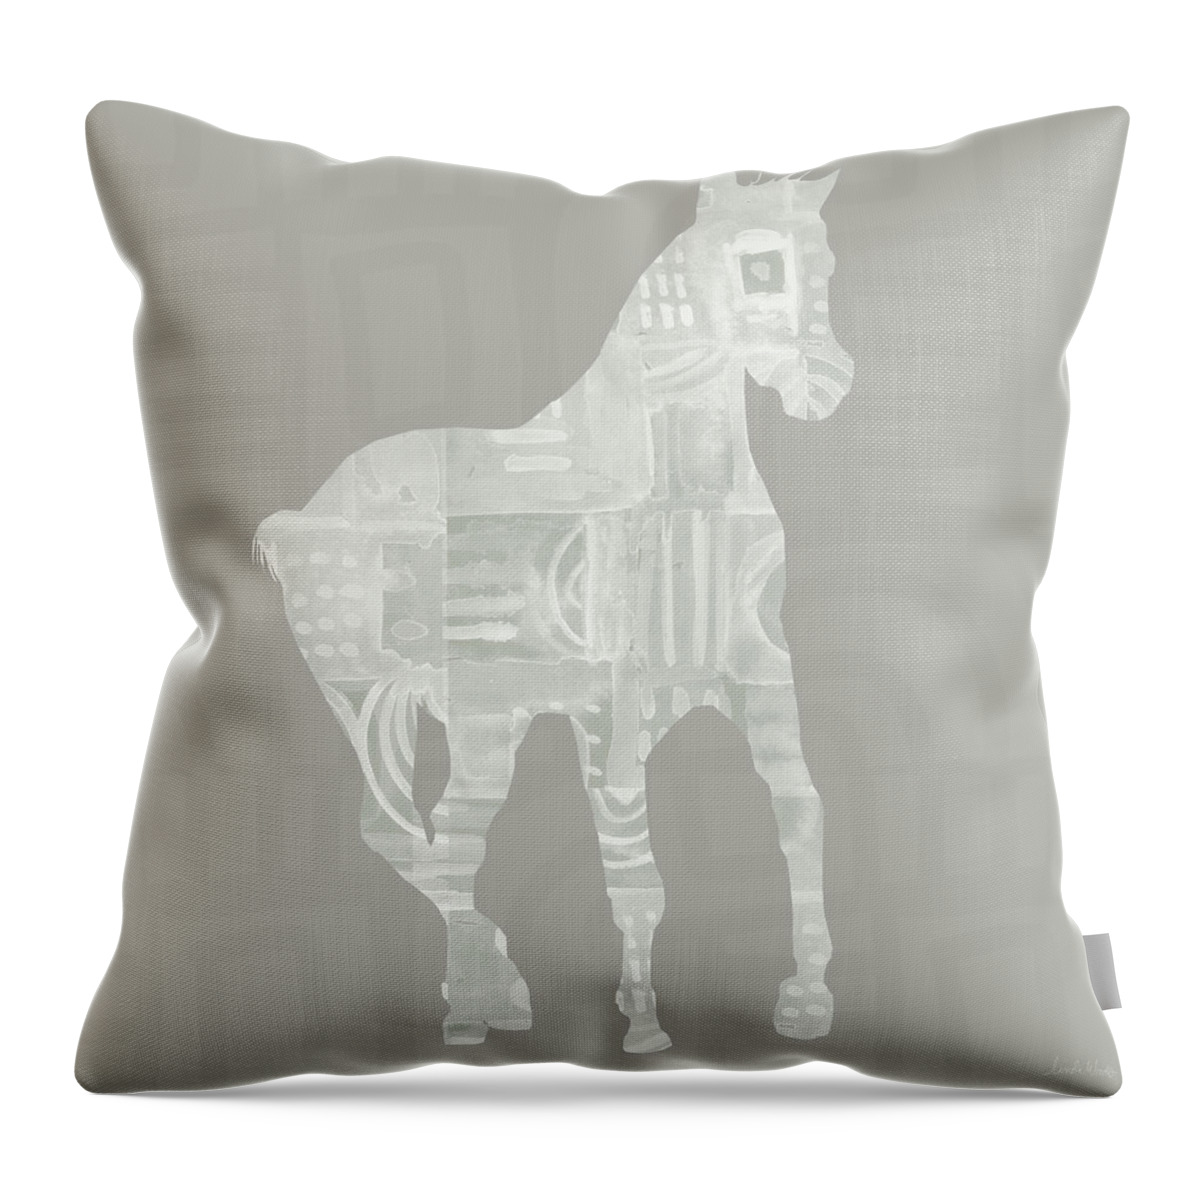 Horse Throw Pillow featuring the painting White Horse 3- Art by Linda Woods by Linda Woods